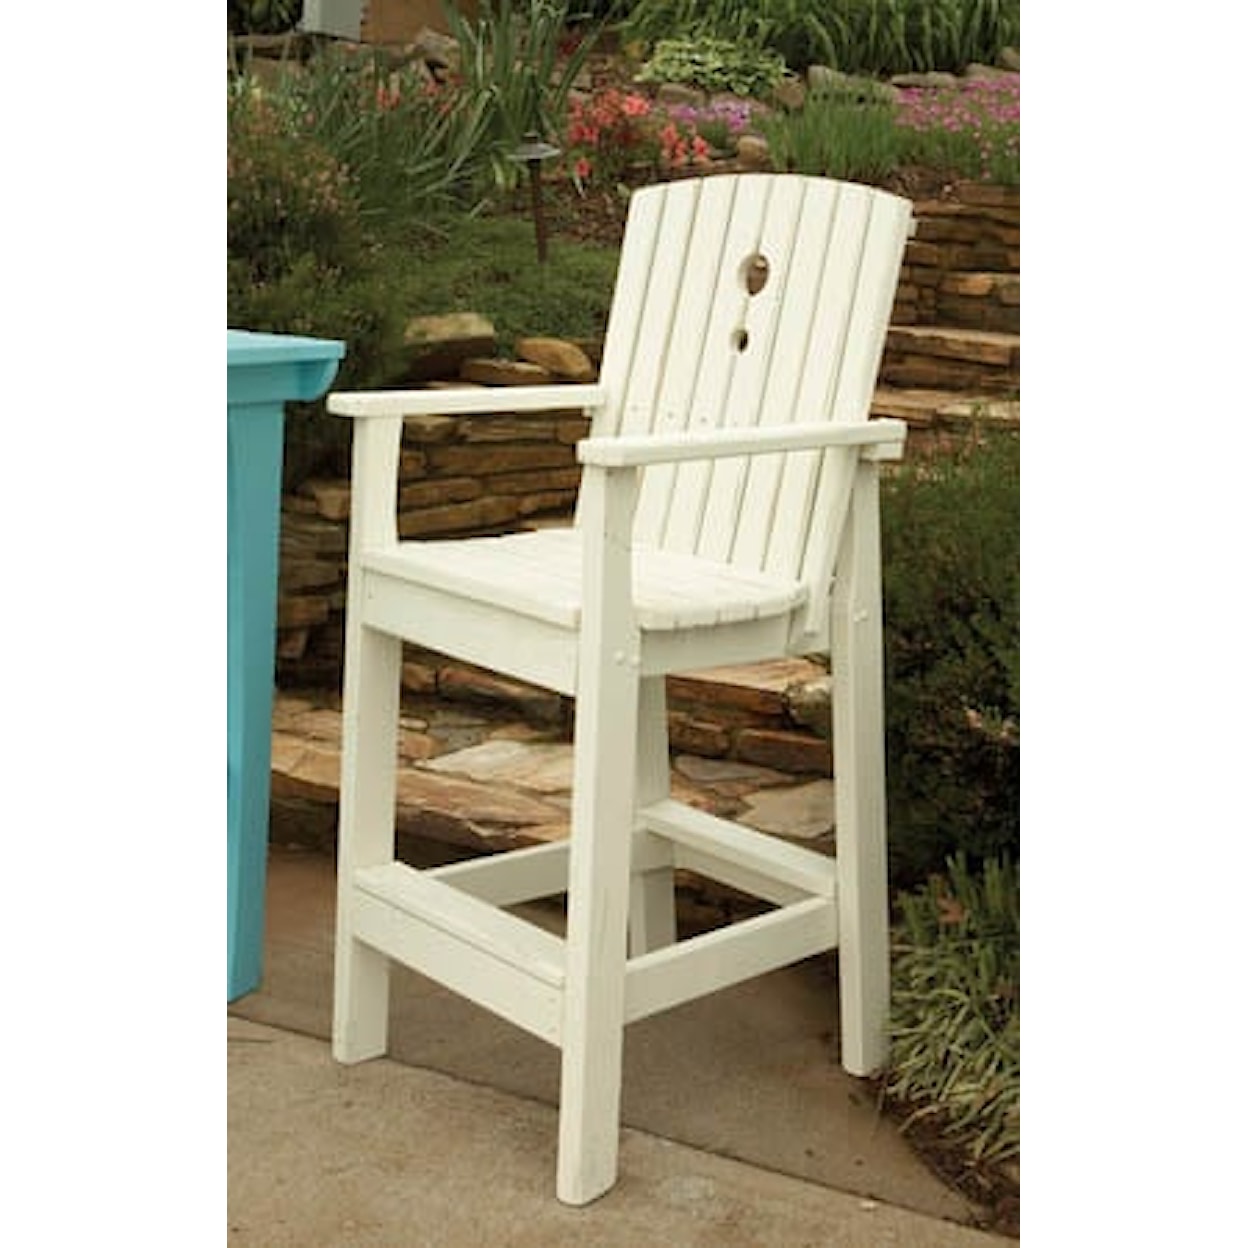 Uwharrie Chair The Companion Collection TALL DINING CHAIR